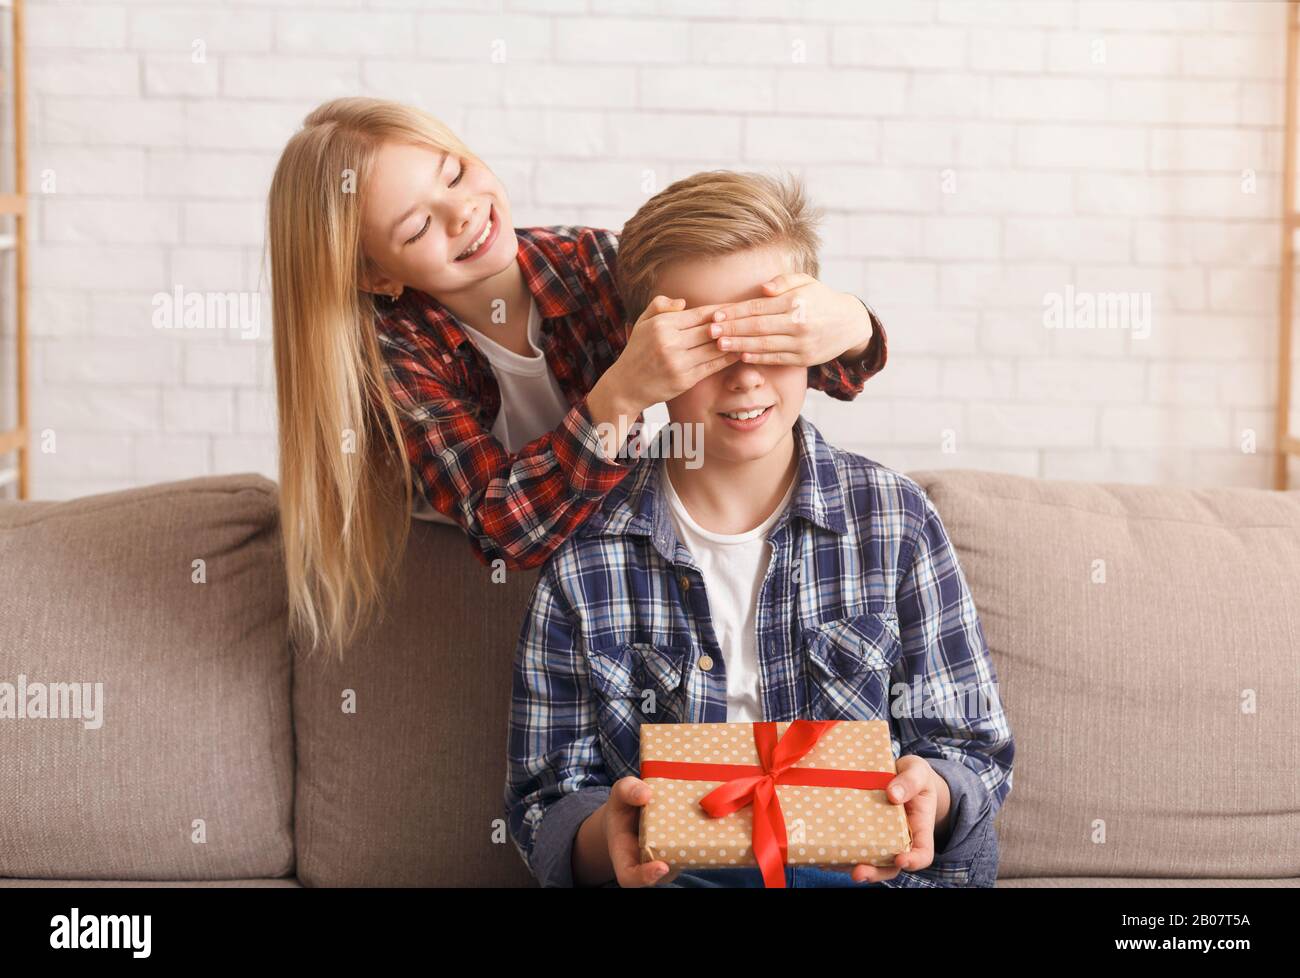 Girl Covering Brother's Eyes Giving Him Birthday Gift Indoor Stock Photo